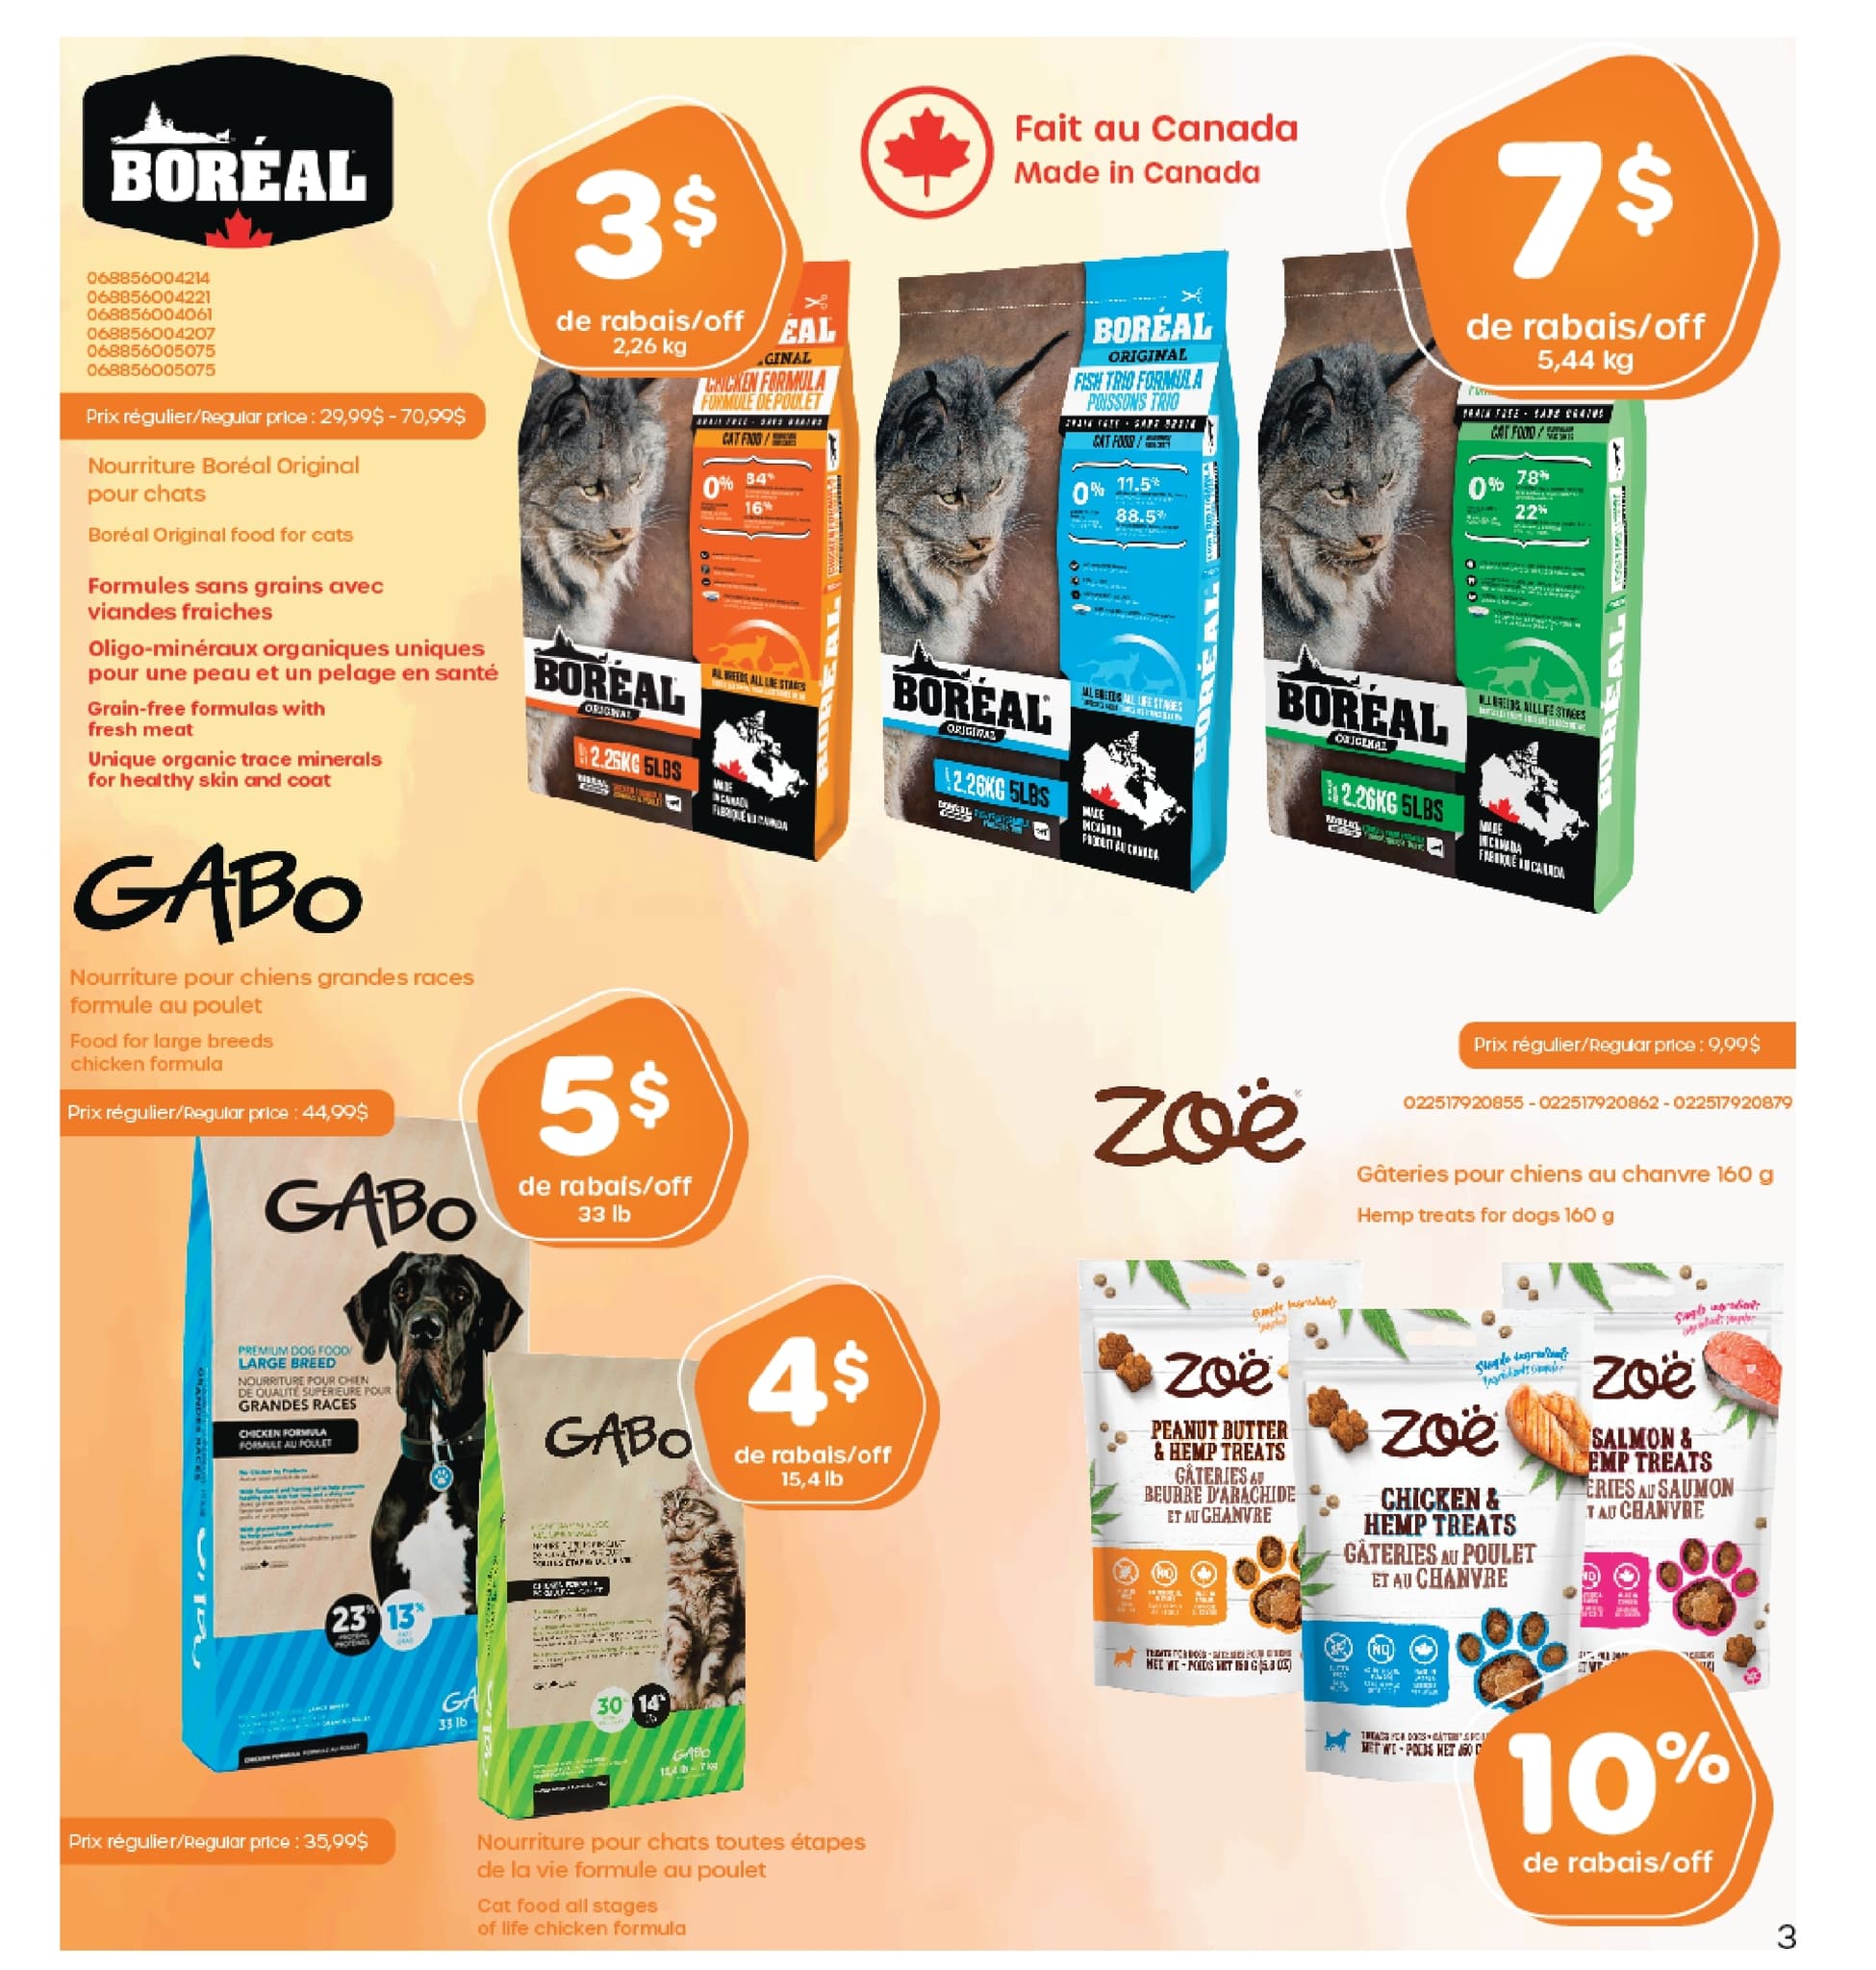 Circulaire Chico Boutique d'Animaux - Page 4